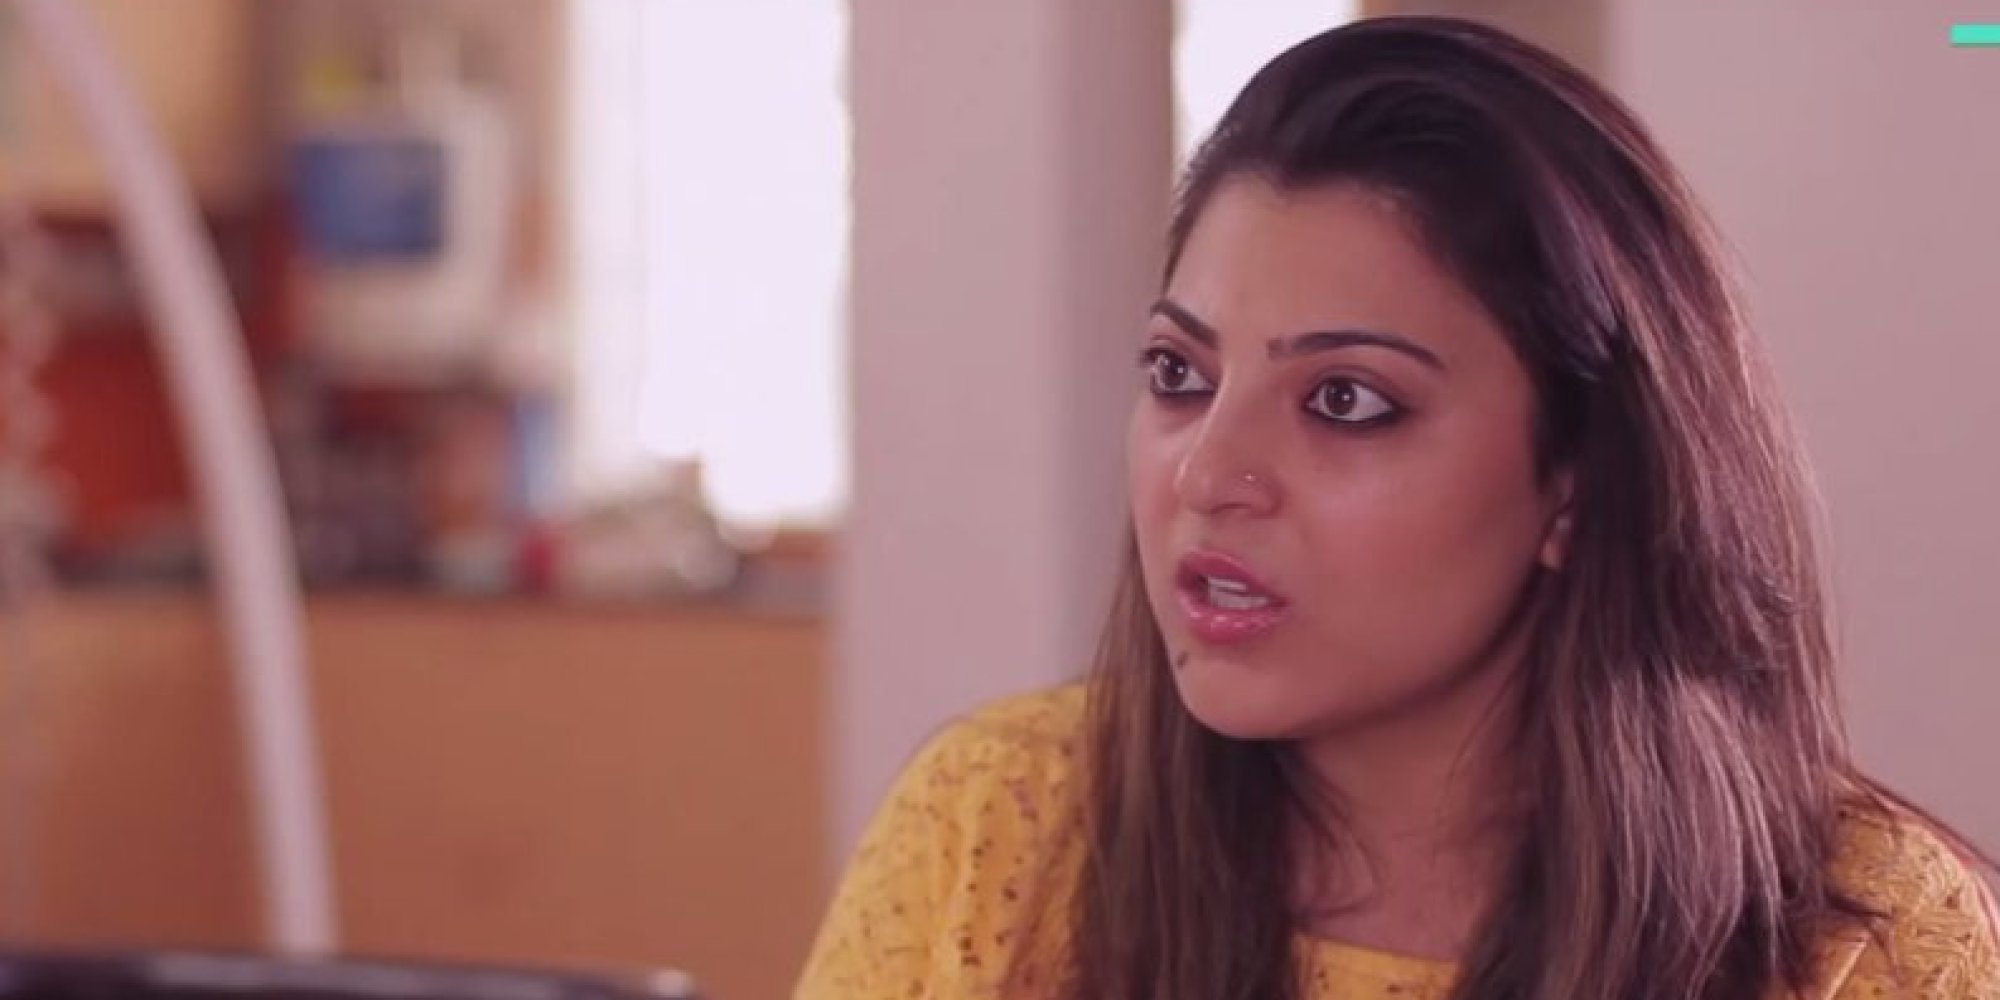 Watch Virginity Can Still Play Deal Breaker In The Modern Indian Marriage Huffpost